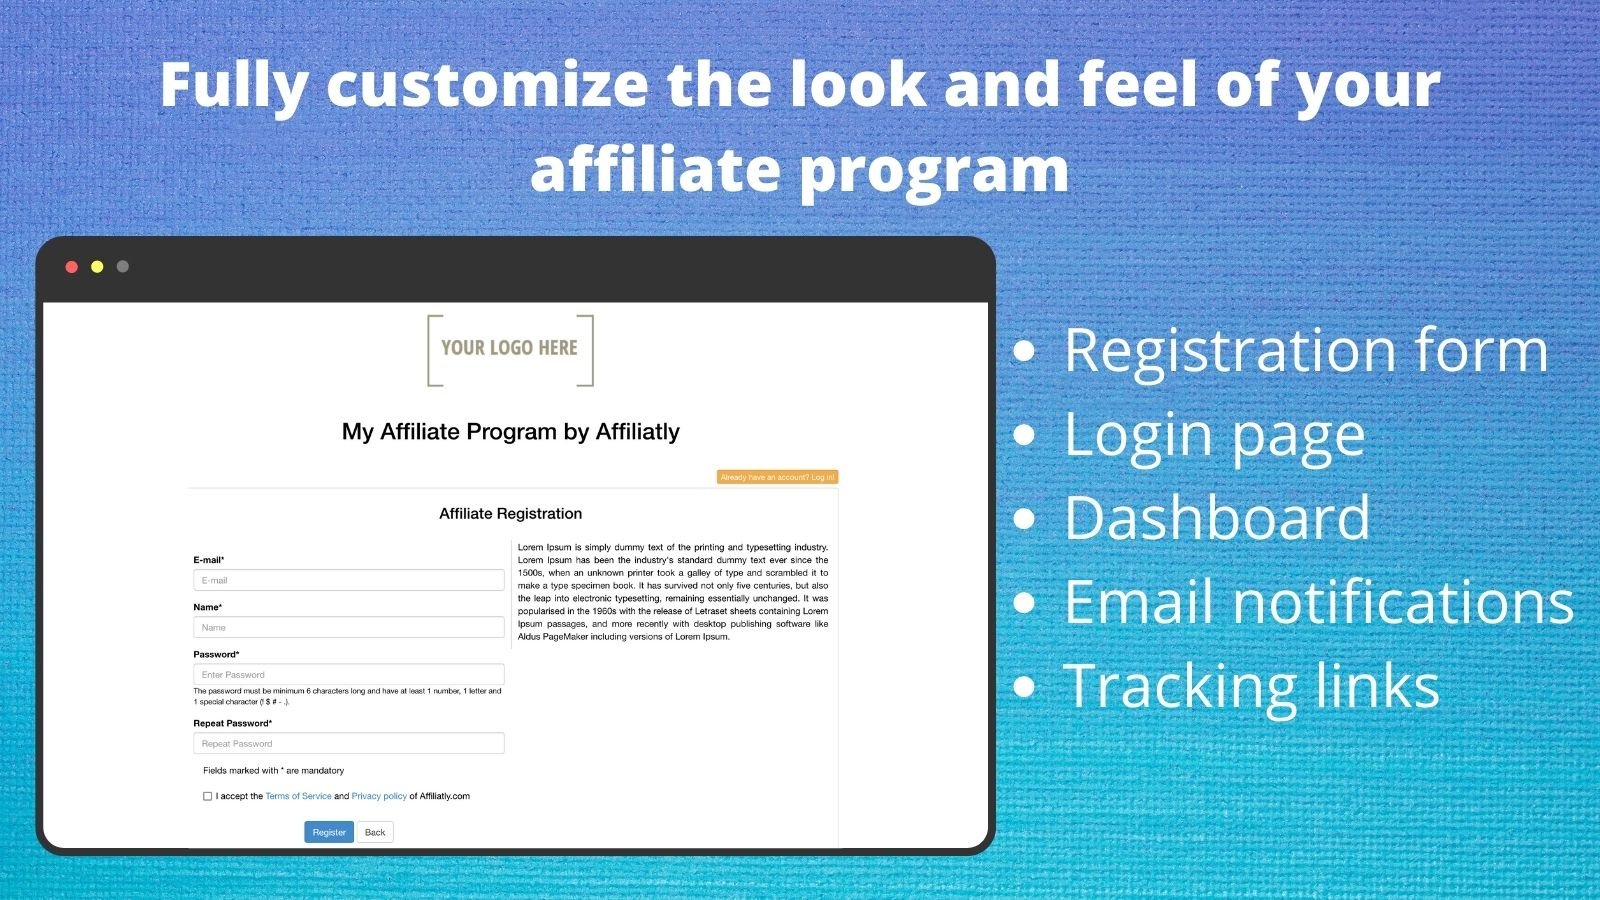 Fully customize the look and feel of your affiliate program